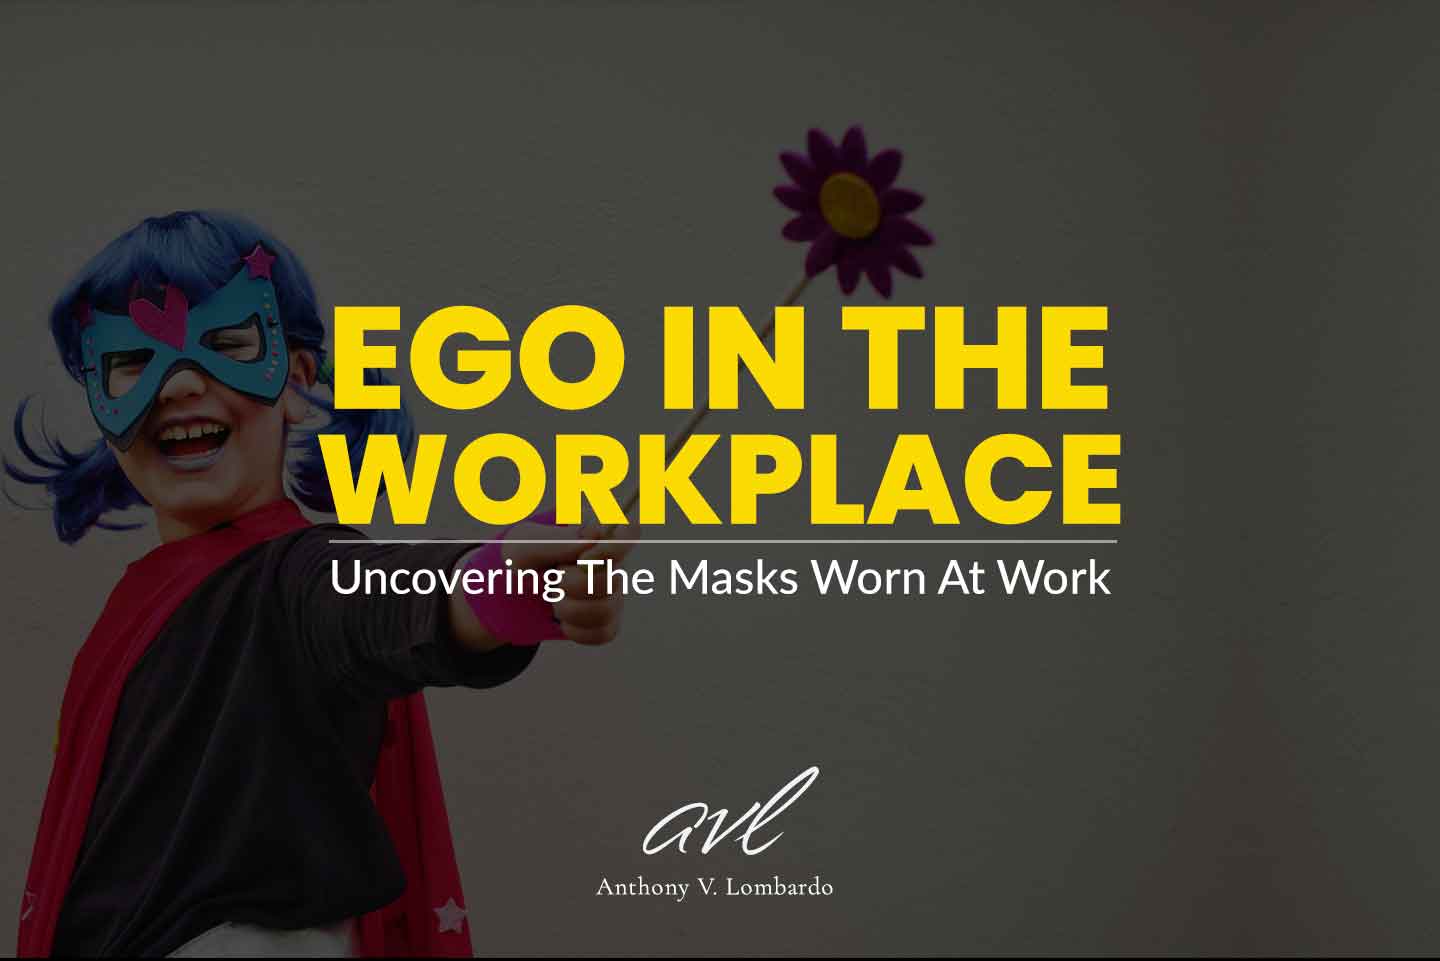 Ego in the workplace: Uncovering The Masks Worn At Work